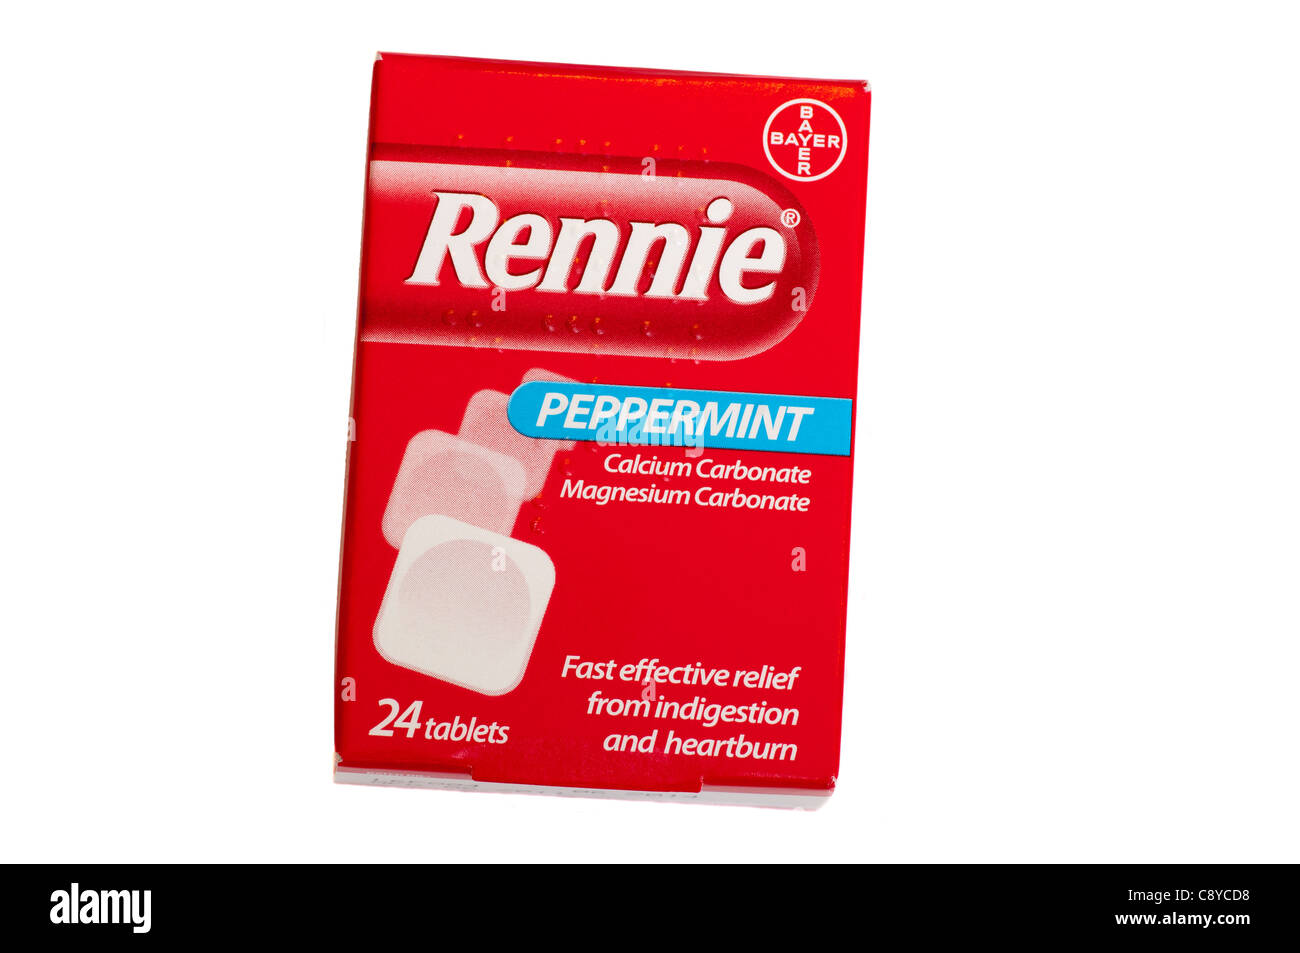 Packet Box Of Peppermint Rennie Rennies Stock Photo